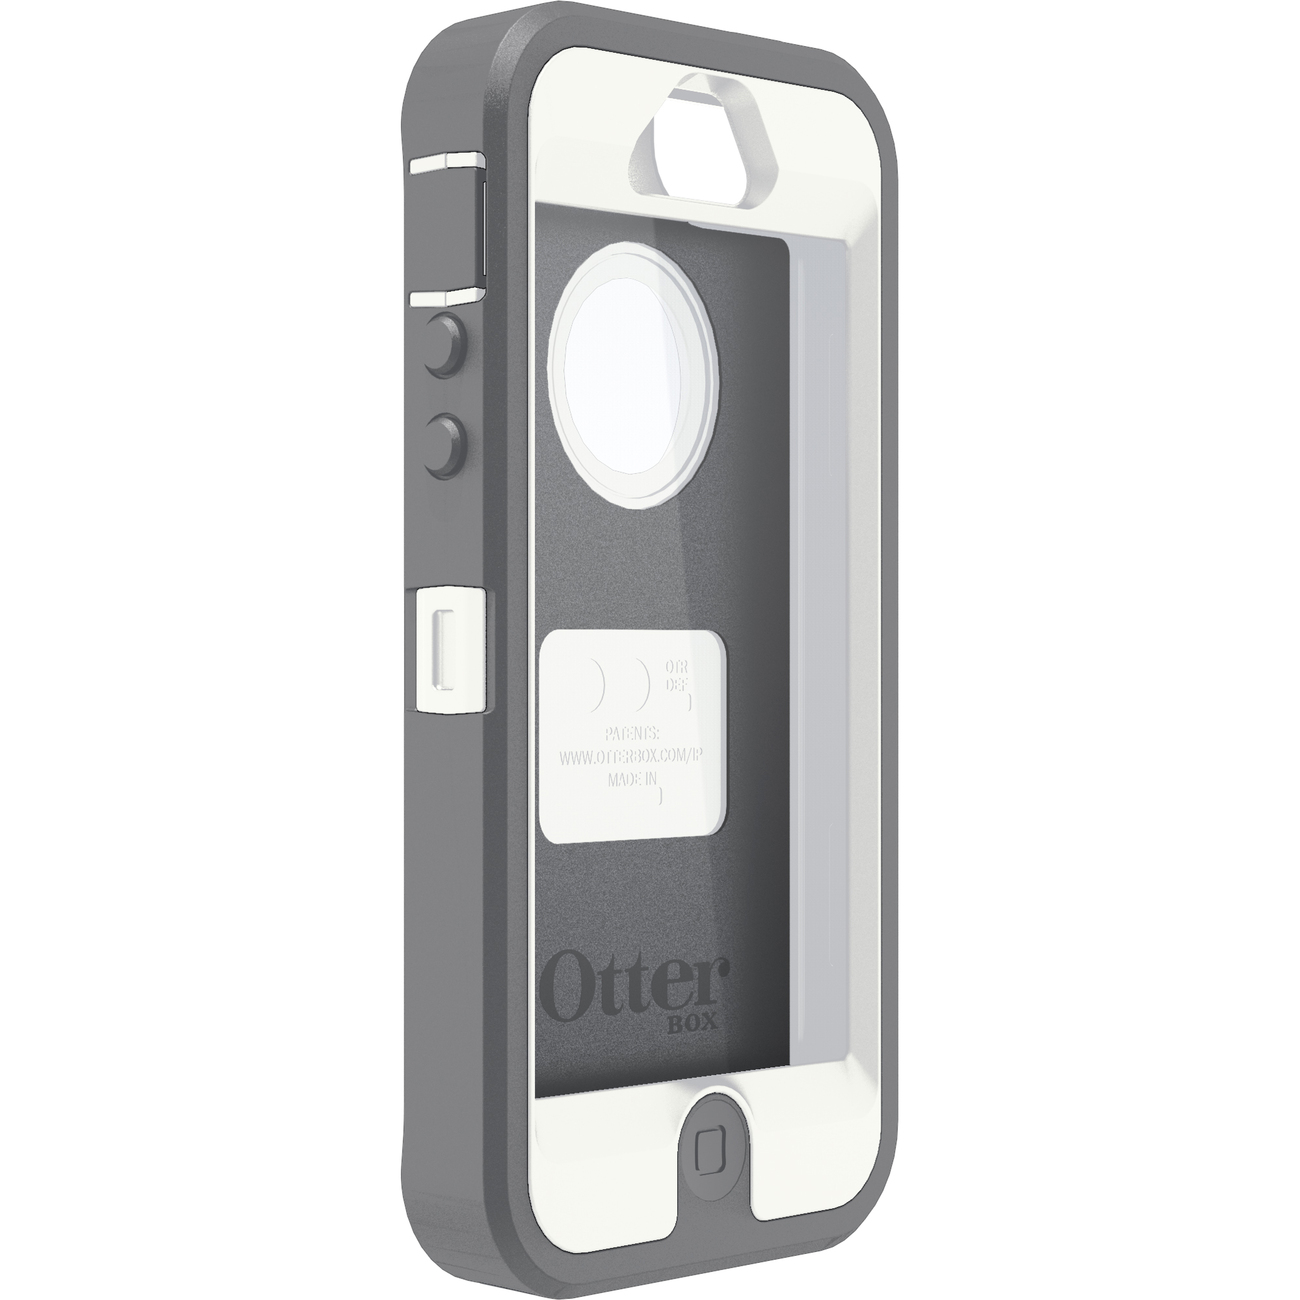 Otterbox Defender Series for iPhone 5,Glacier